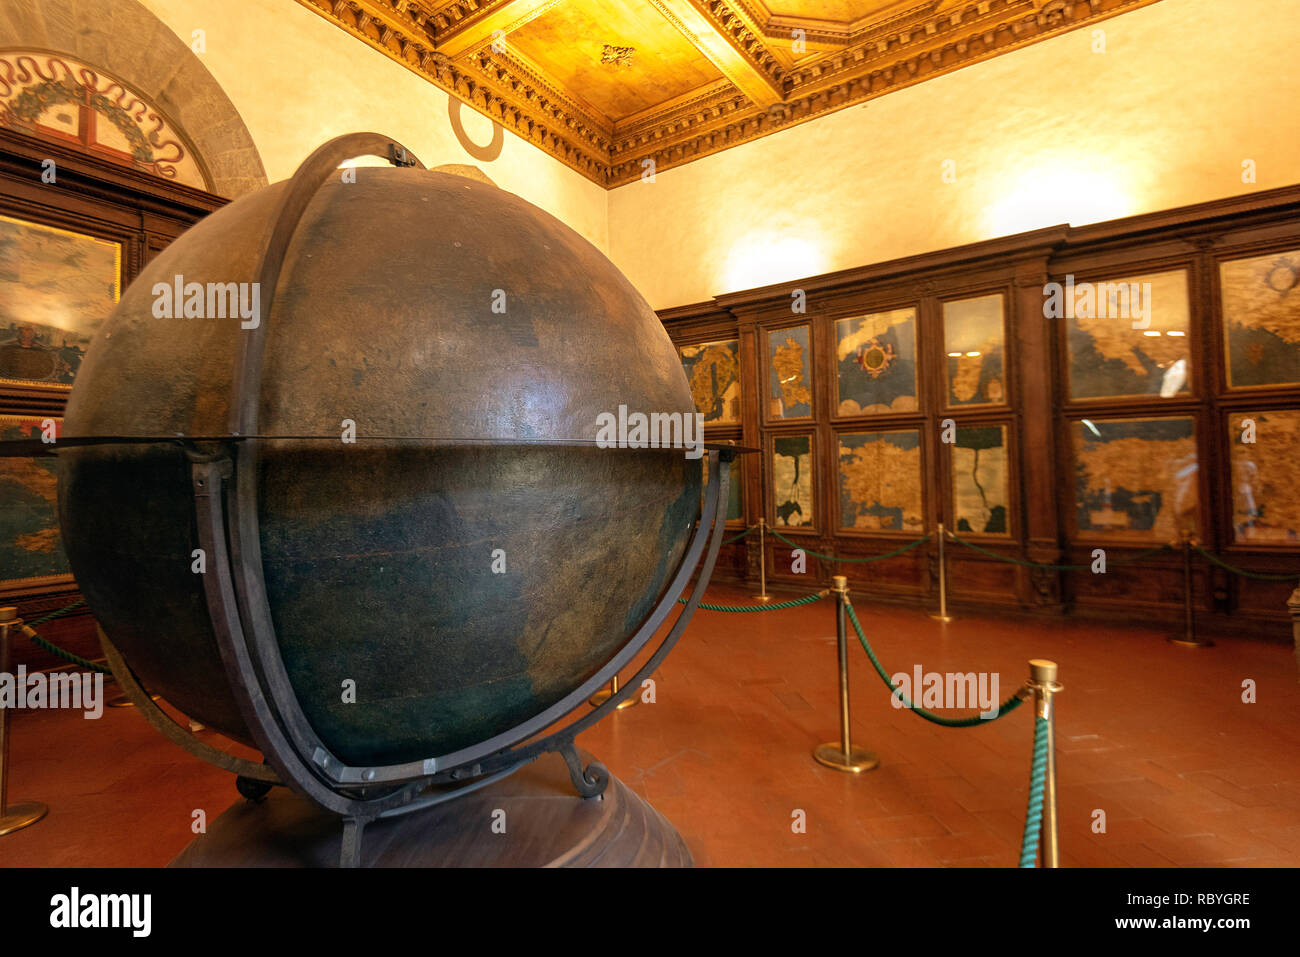 Terrestial Globe by Egnazio Danti, Hall of Geographical Maps, Palazzo Vecchio, Florence, Italy Stock Photo